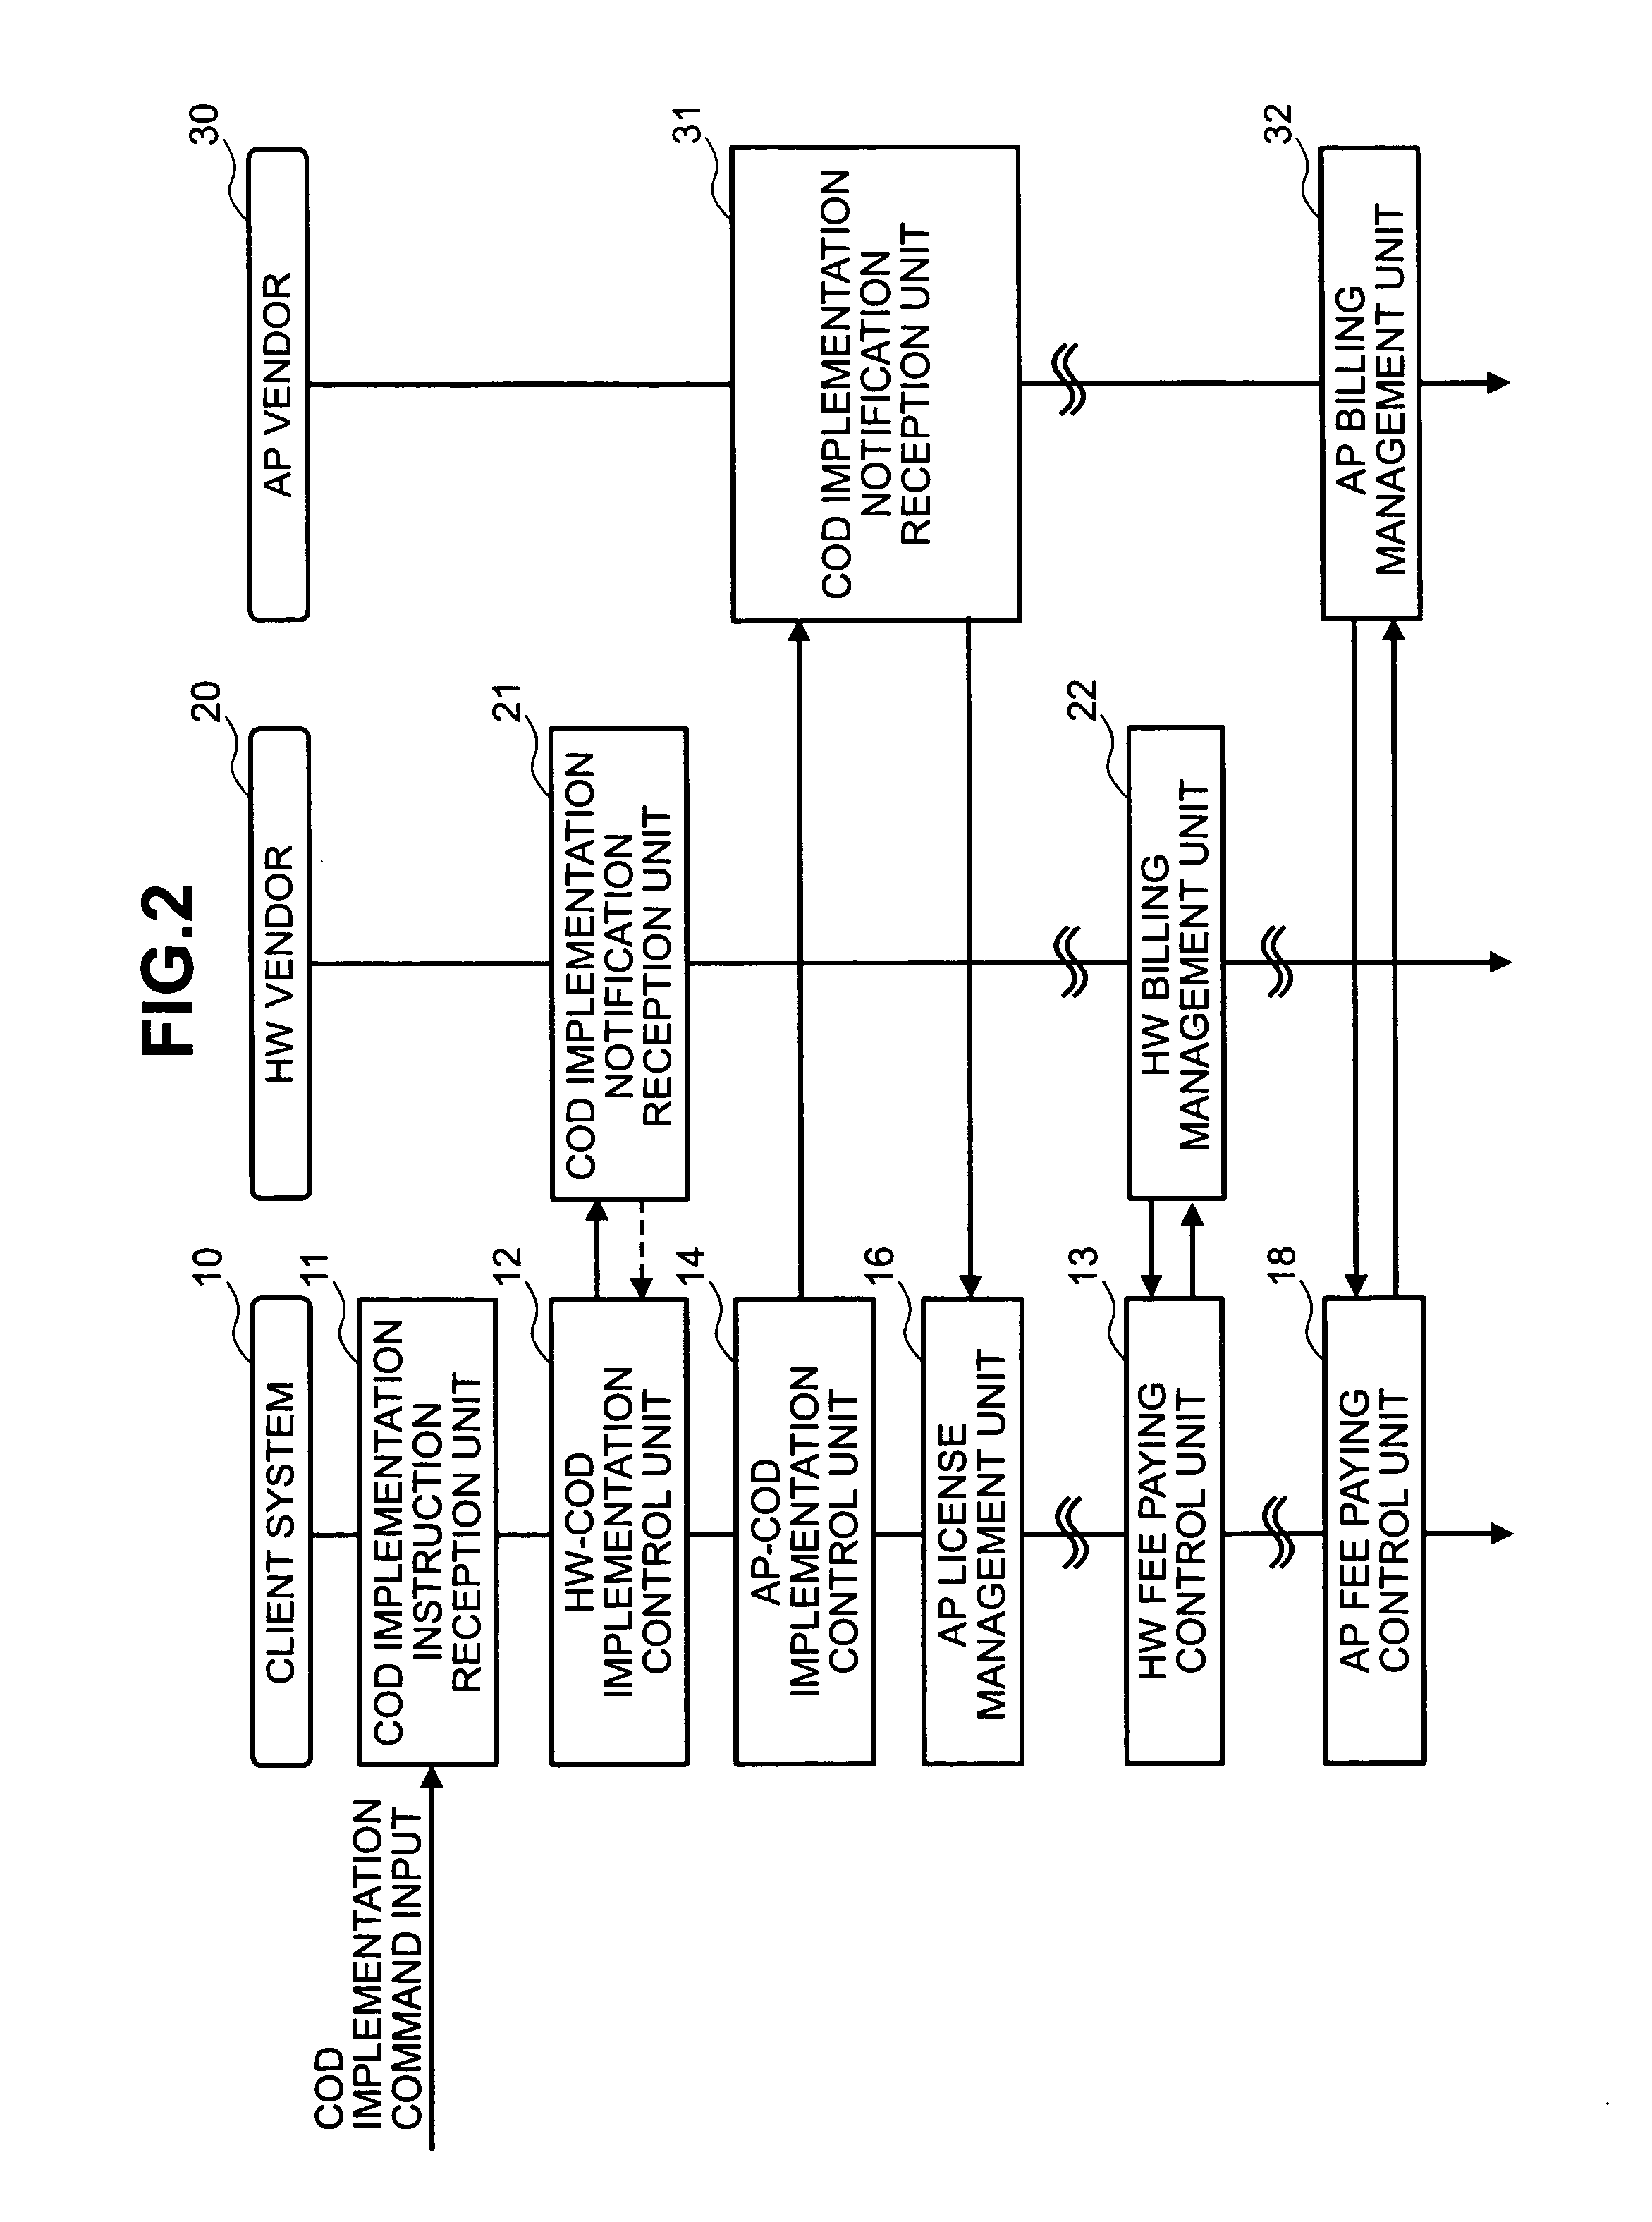 Method for modifying computer configuration and configuration of program which operates on computer, and computing device and system for implementing the method